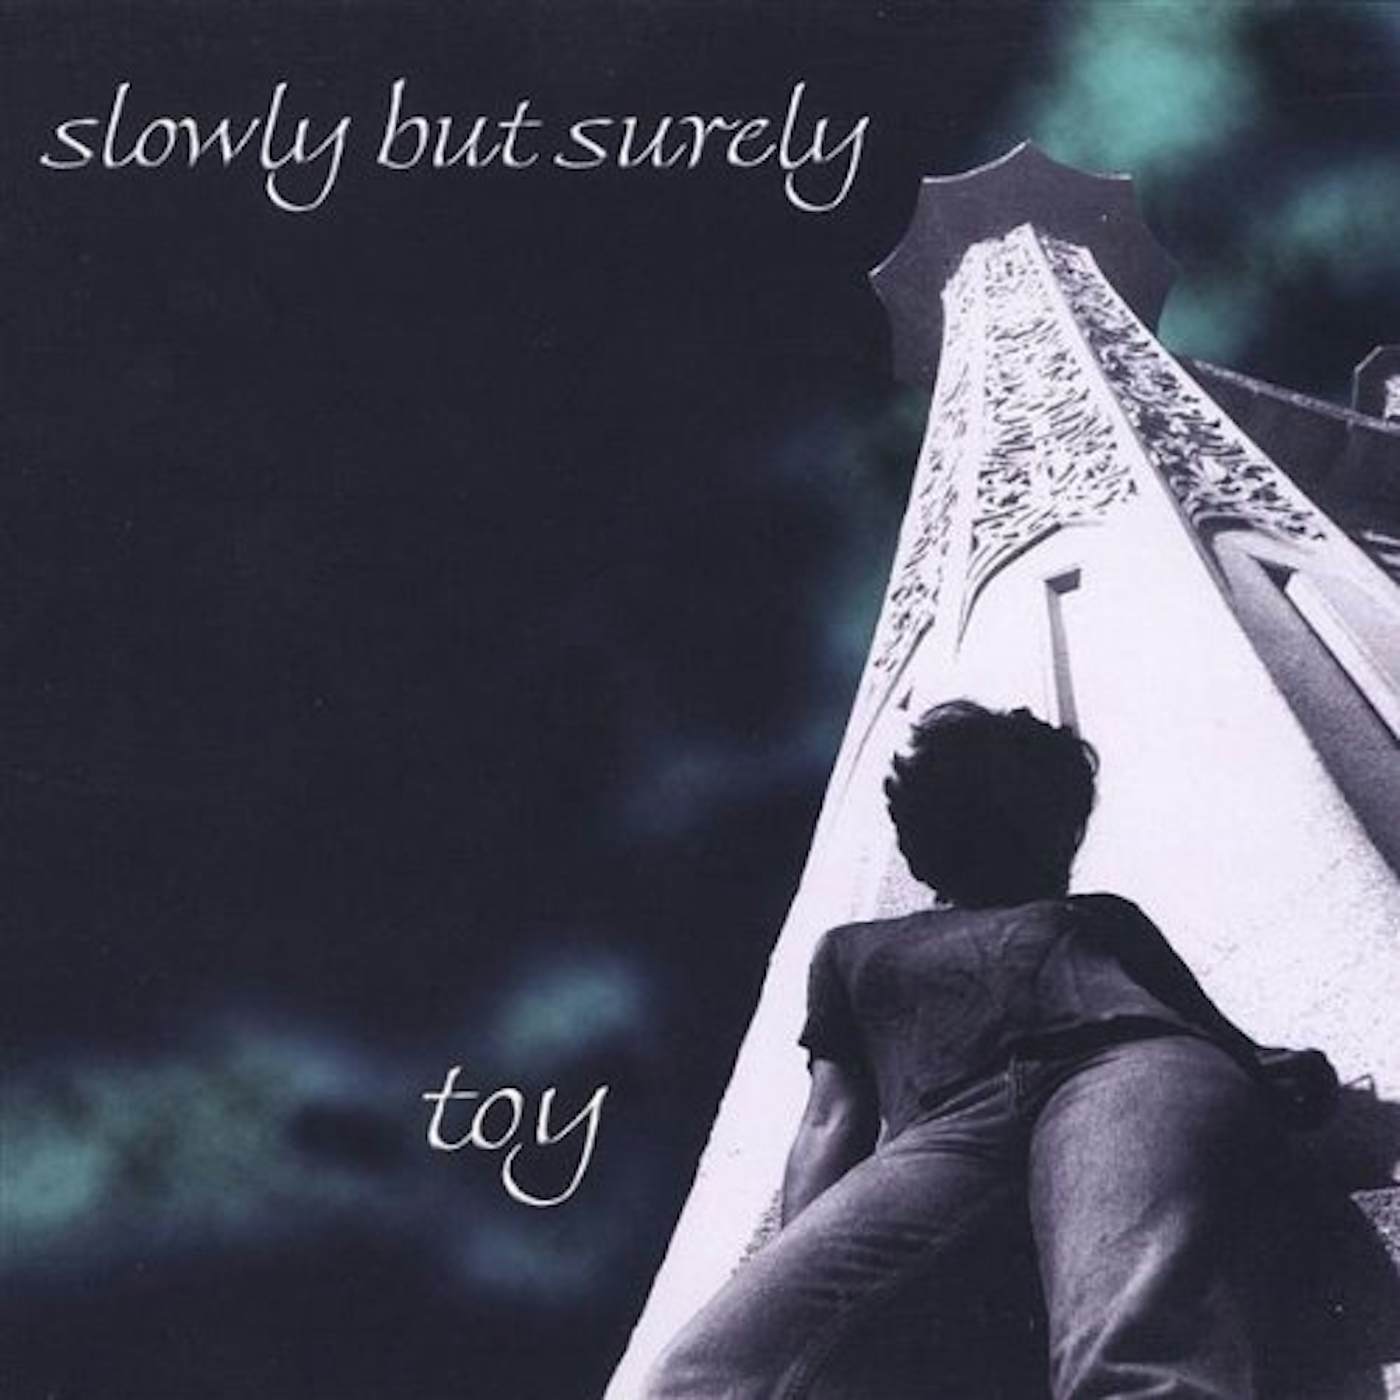 TOY SLOWLY BUT SURELY CD